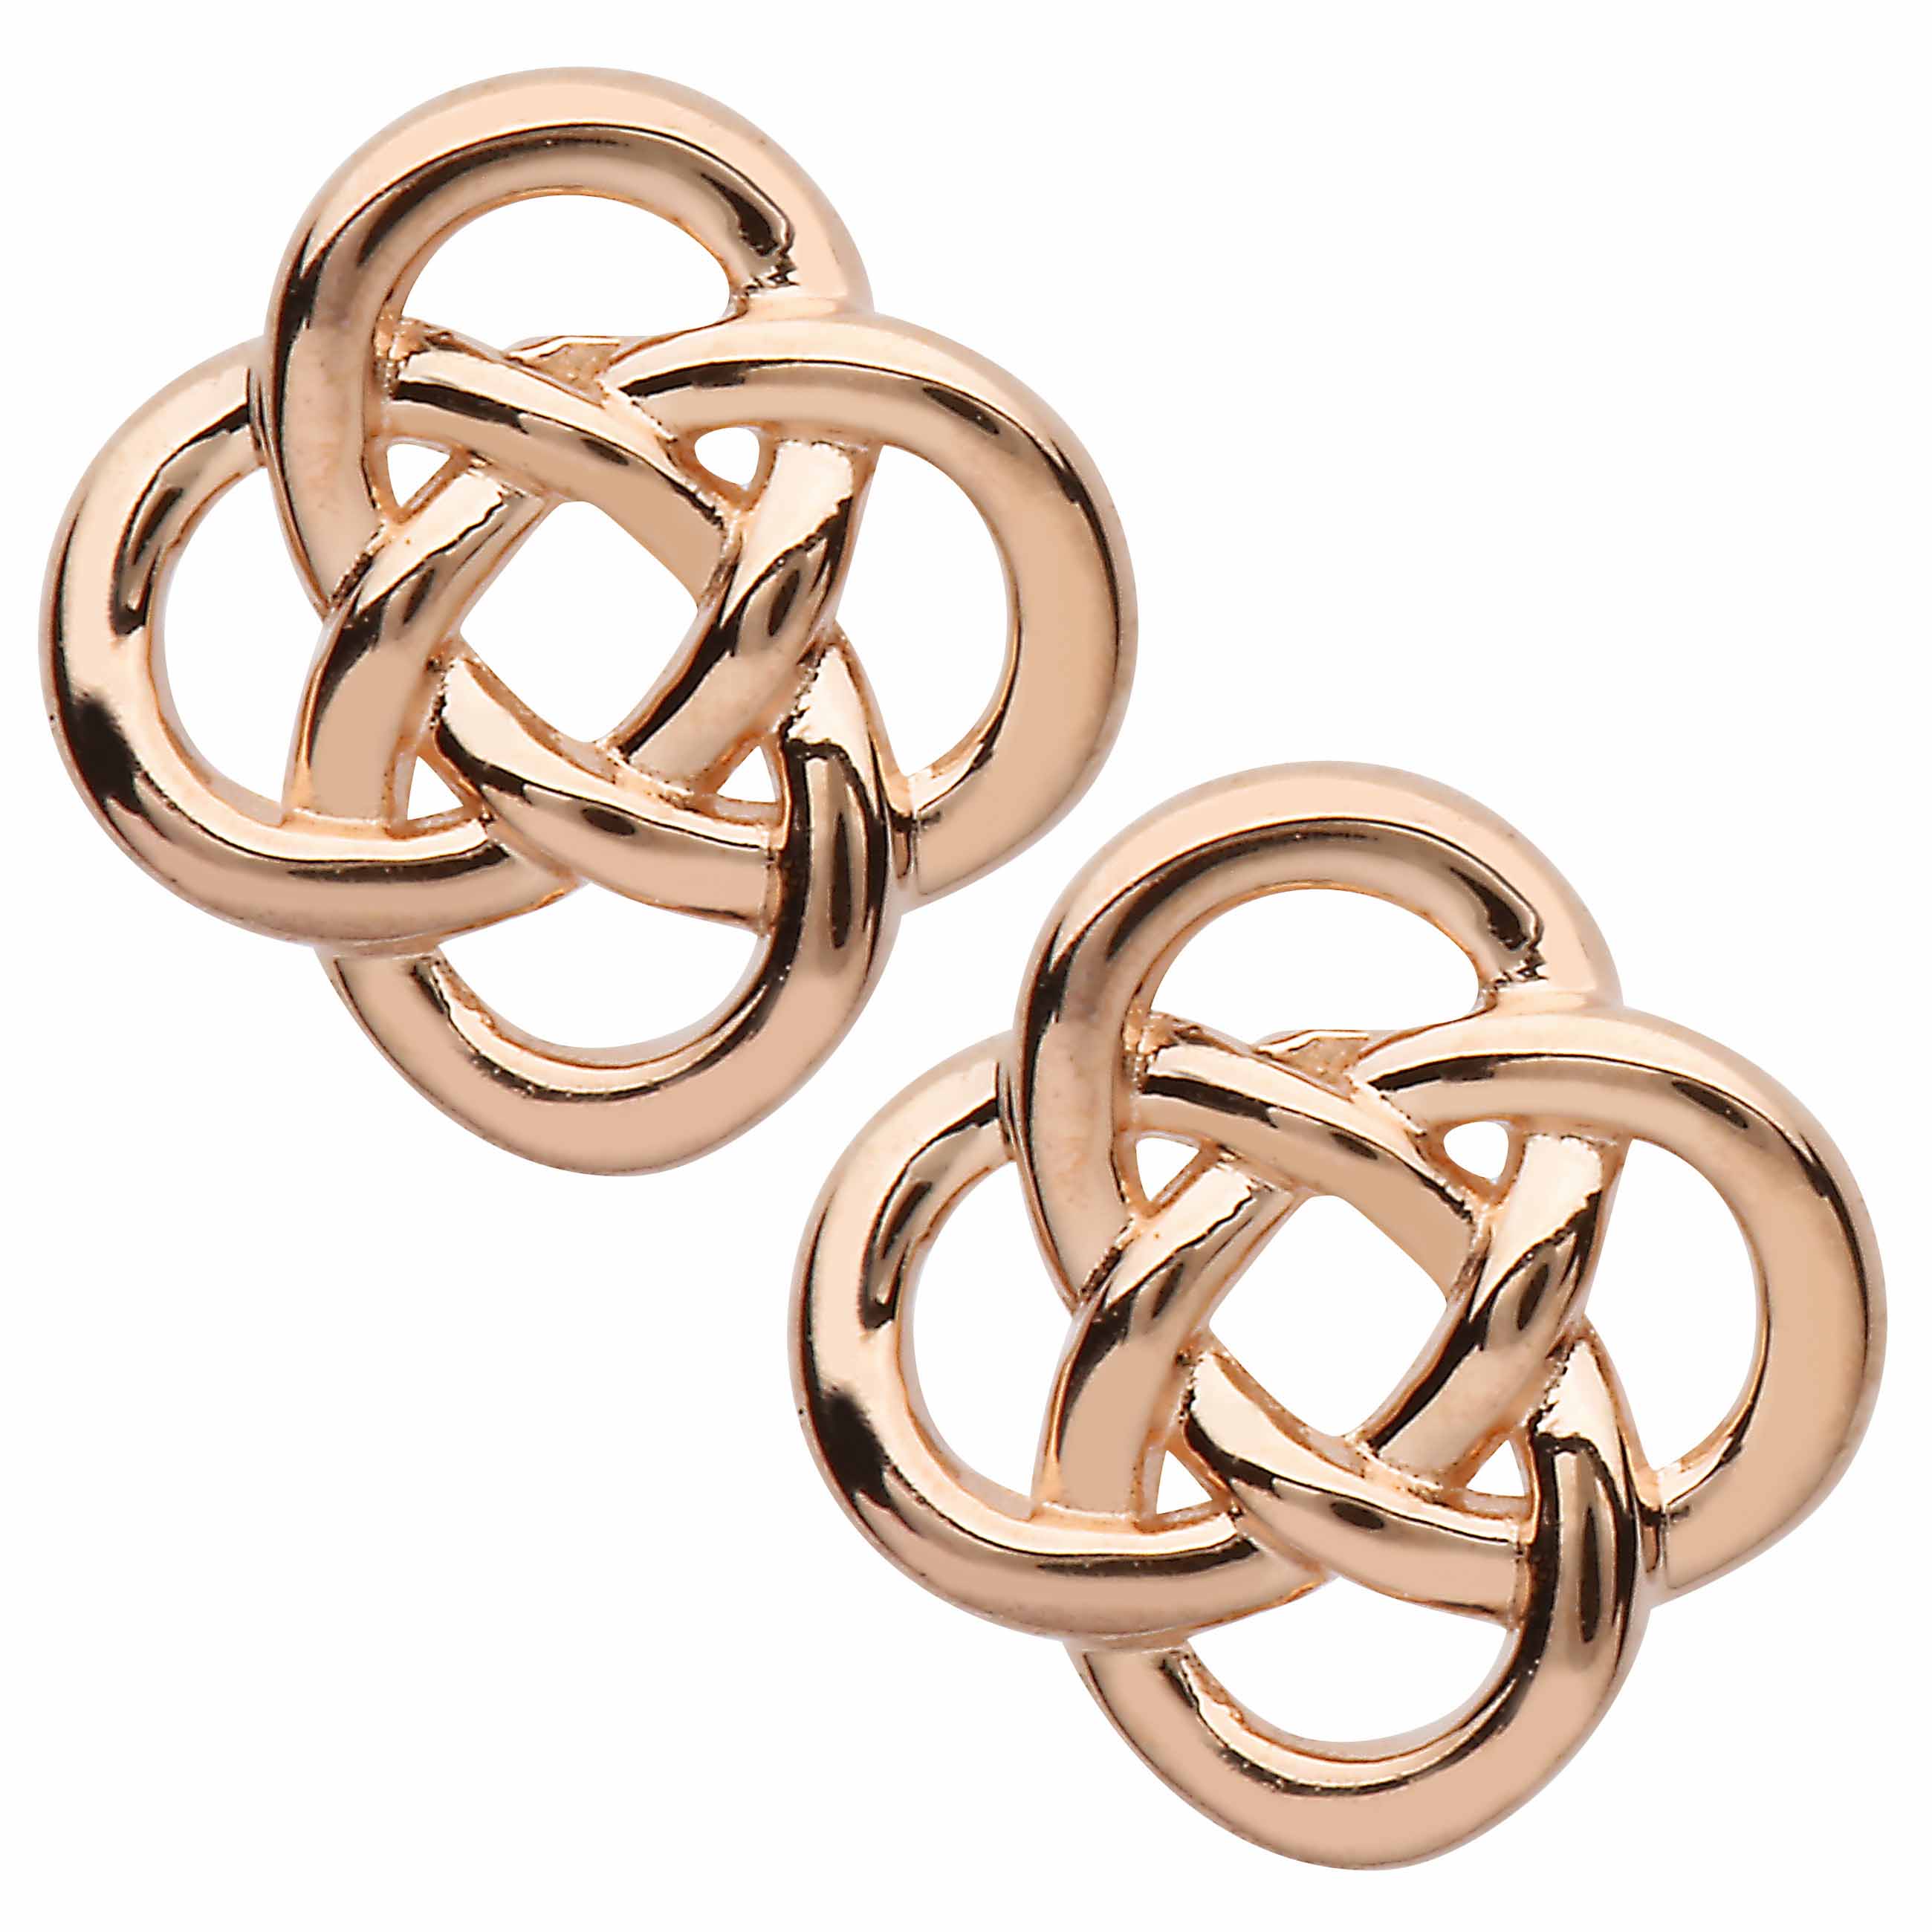 Product image for Irish Earrings | Sterling Silver Rose Gold Celtic Knot Stud Earrings